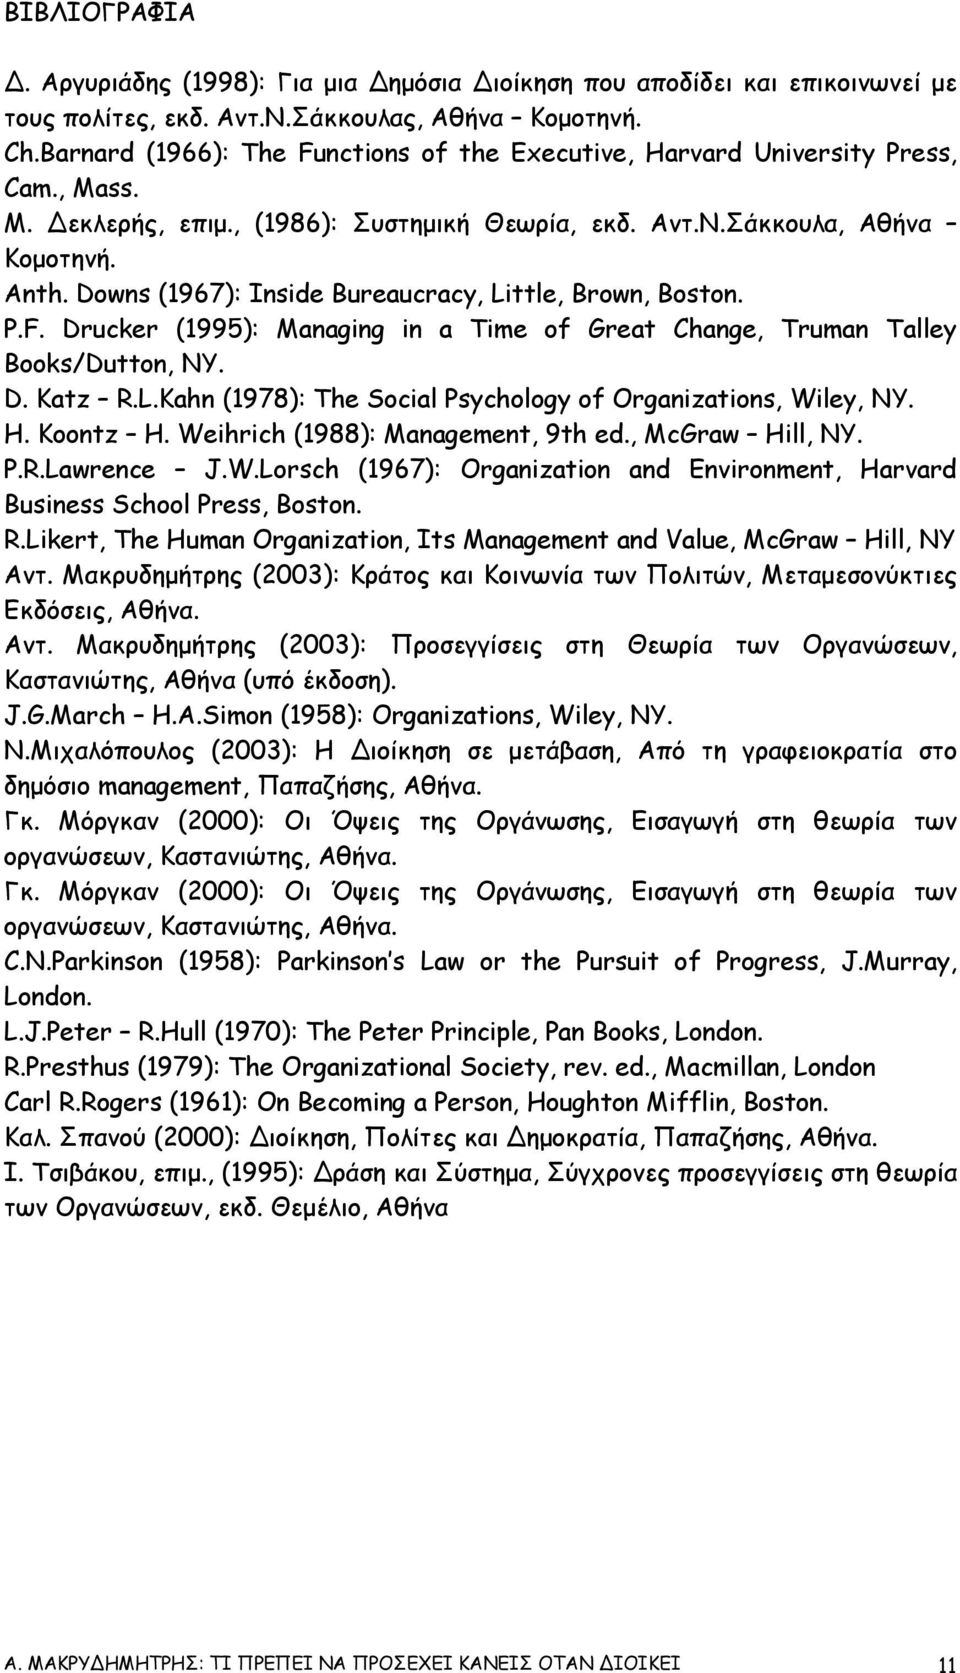 Downs (1967): Inside Bureaucracy, Little, Brown, Boston. P.F. Drucker (1995): Managing in a Time of Great Change, Truman Talley Books/Dutton, NY. D. Katz R.L.Kahn (1978): The Social Psychology of Organizations, Wiley, NY.